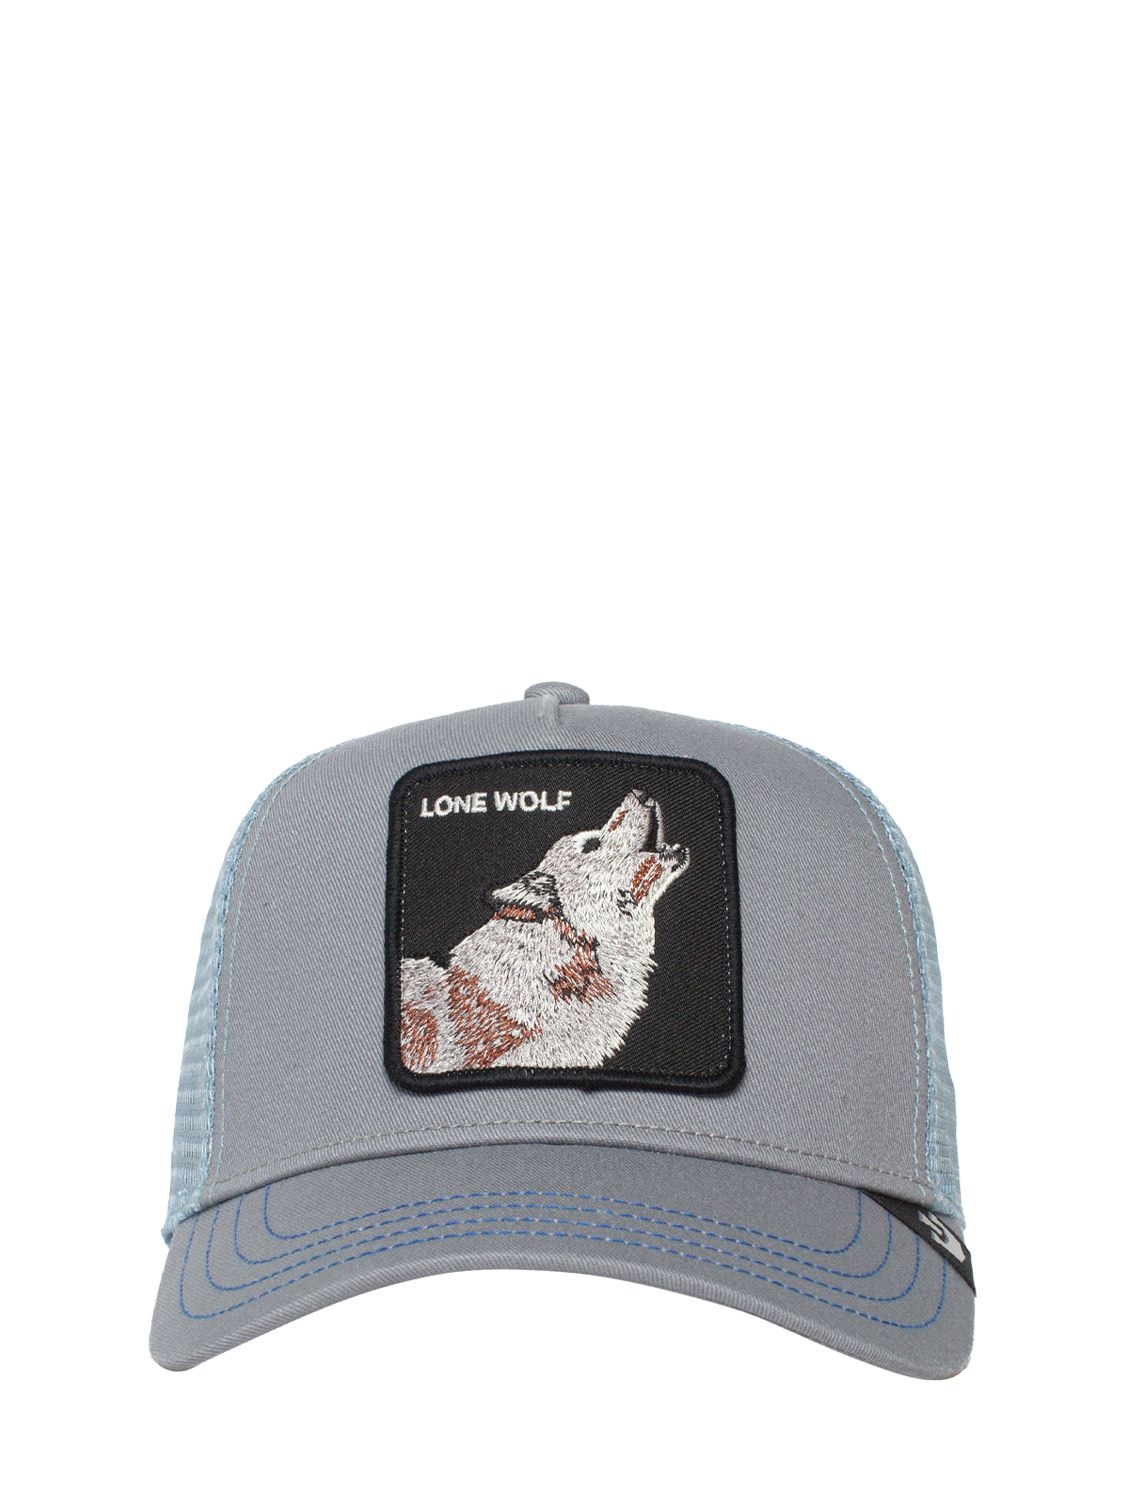 Image of The Lone Wolf Trucker Hat W/patch